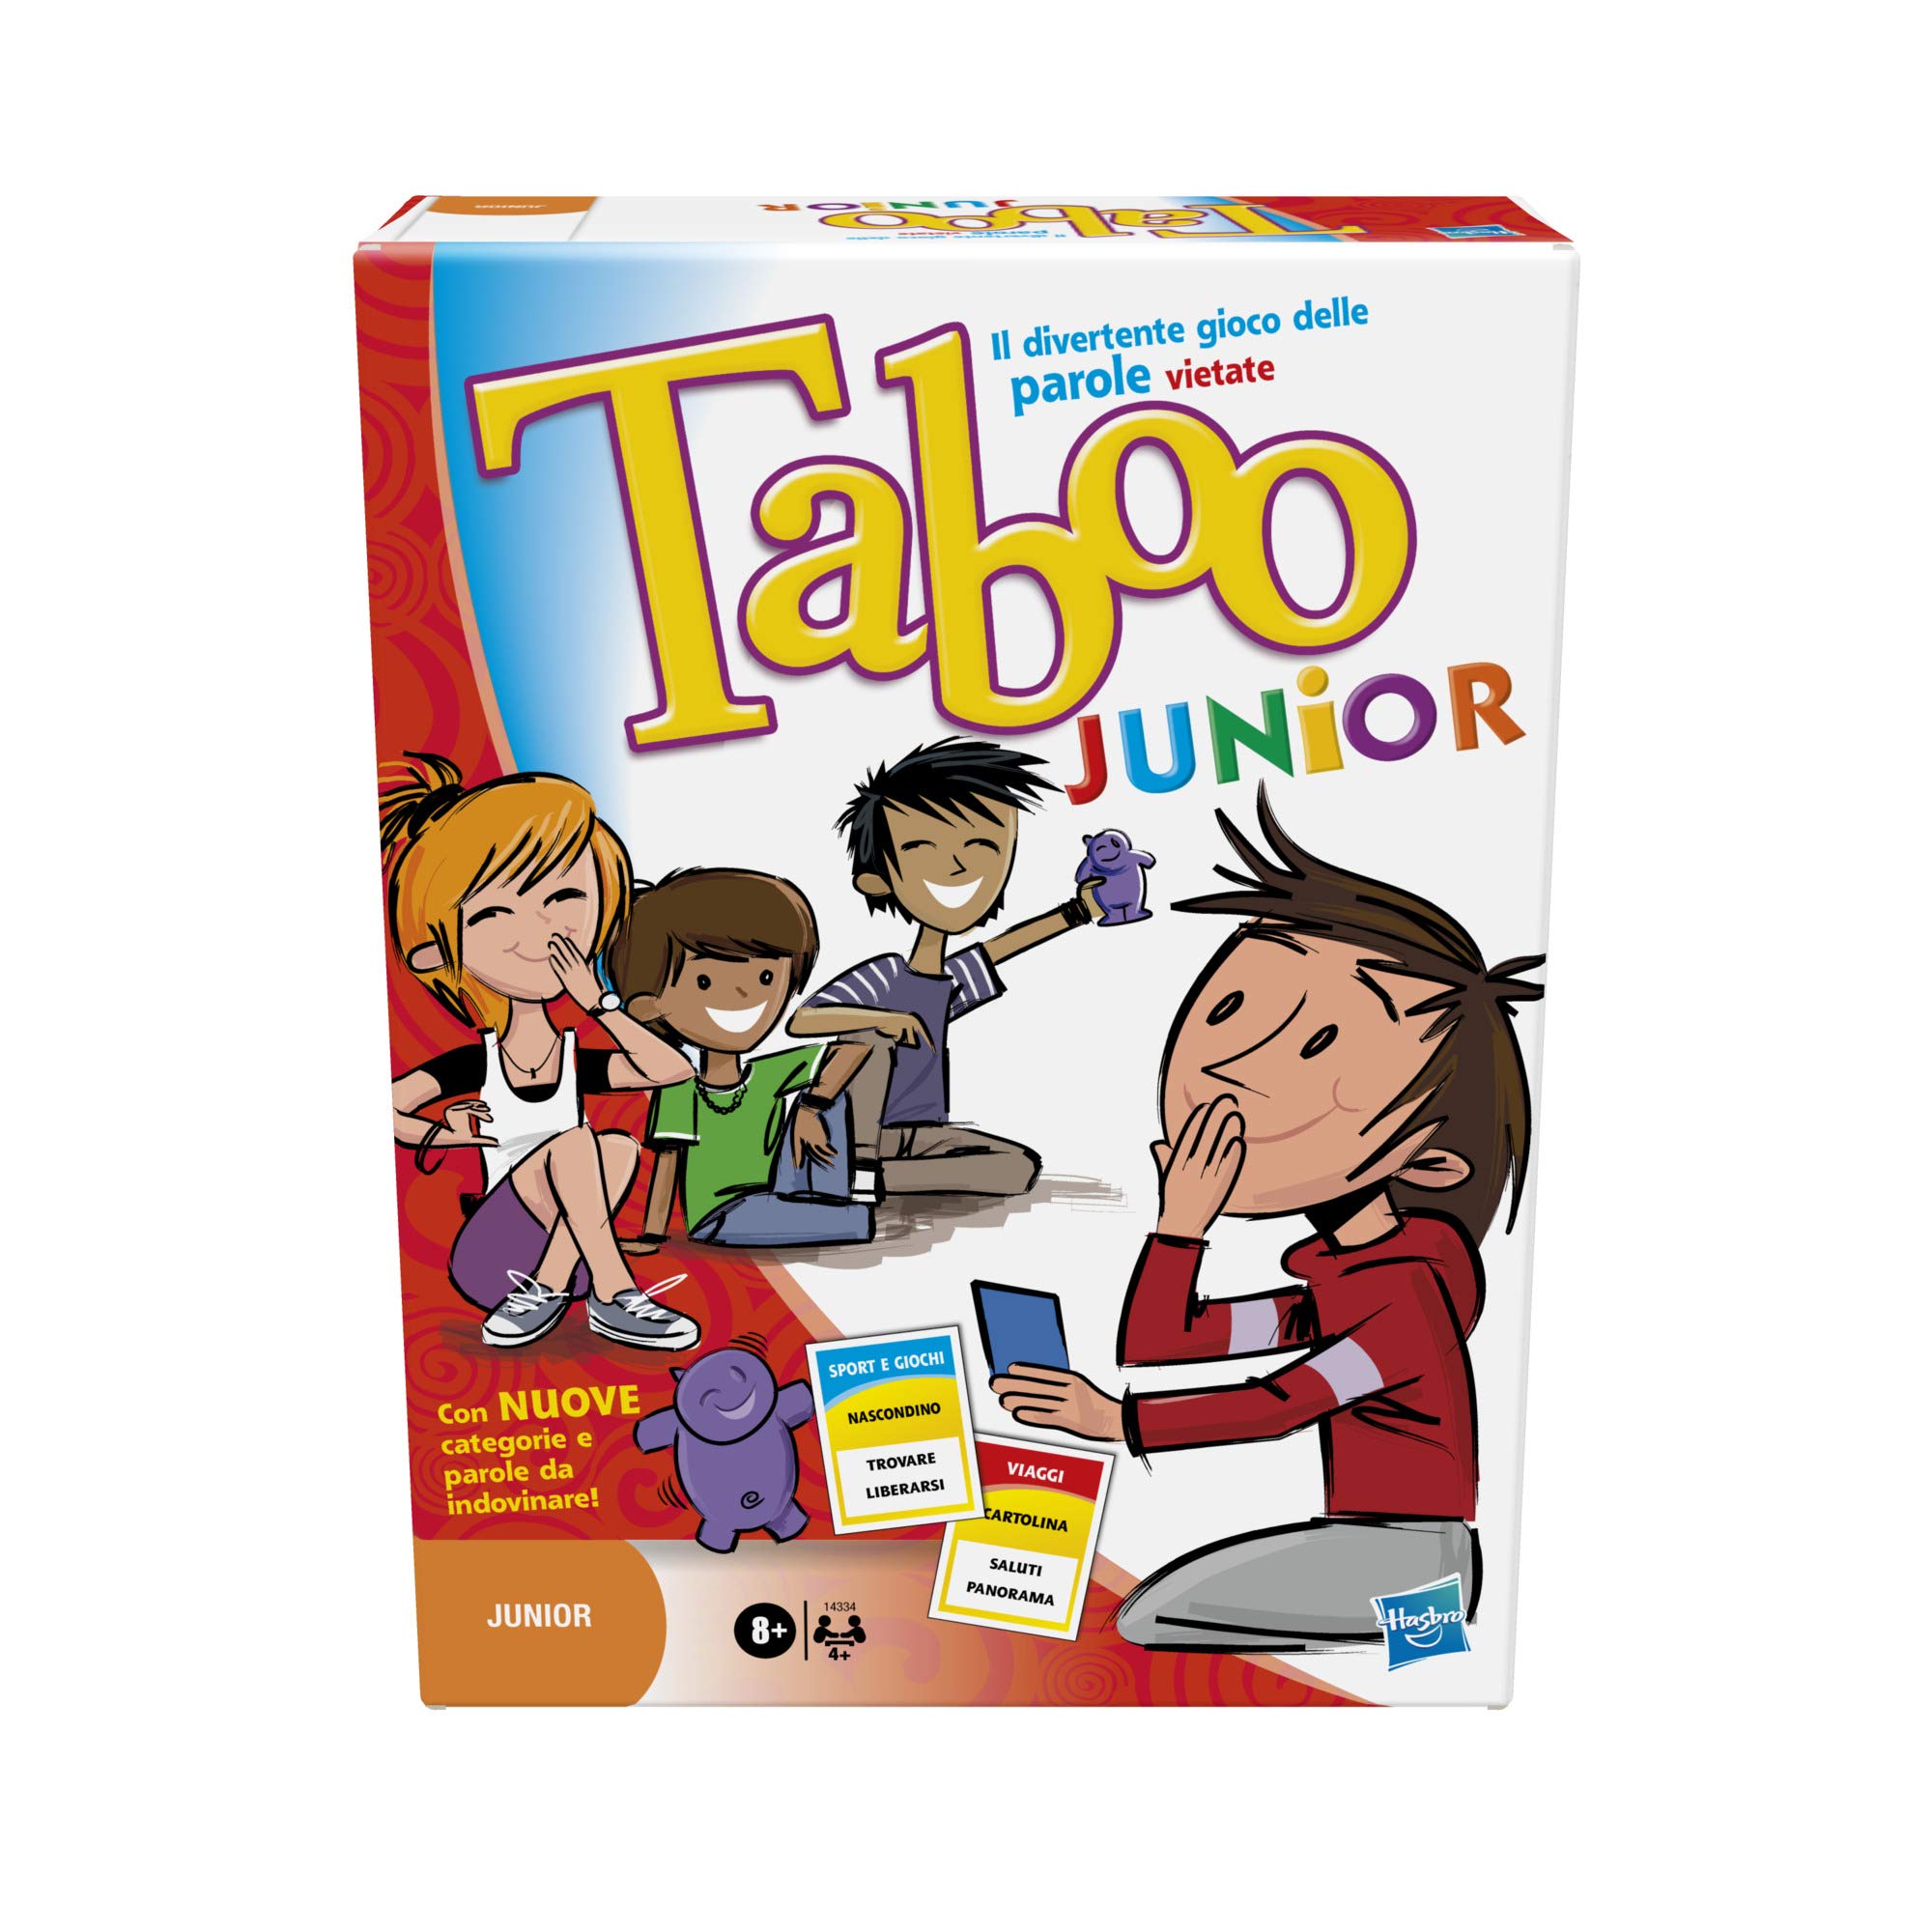 10-astounding-facts-about-taboo-junior